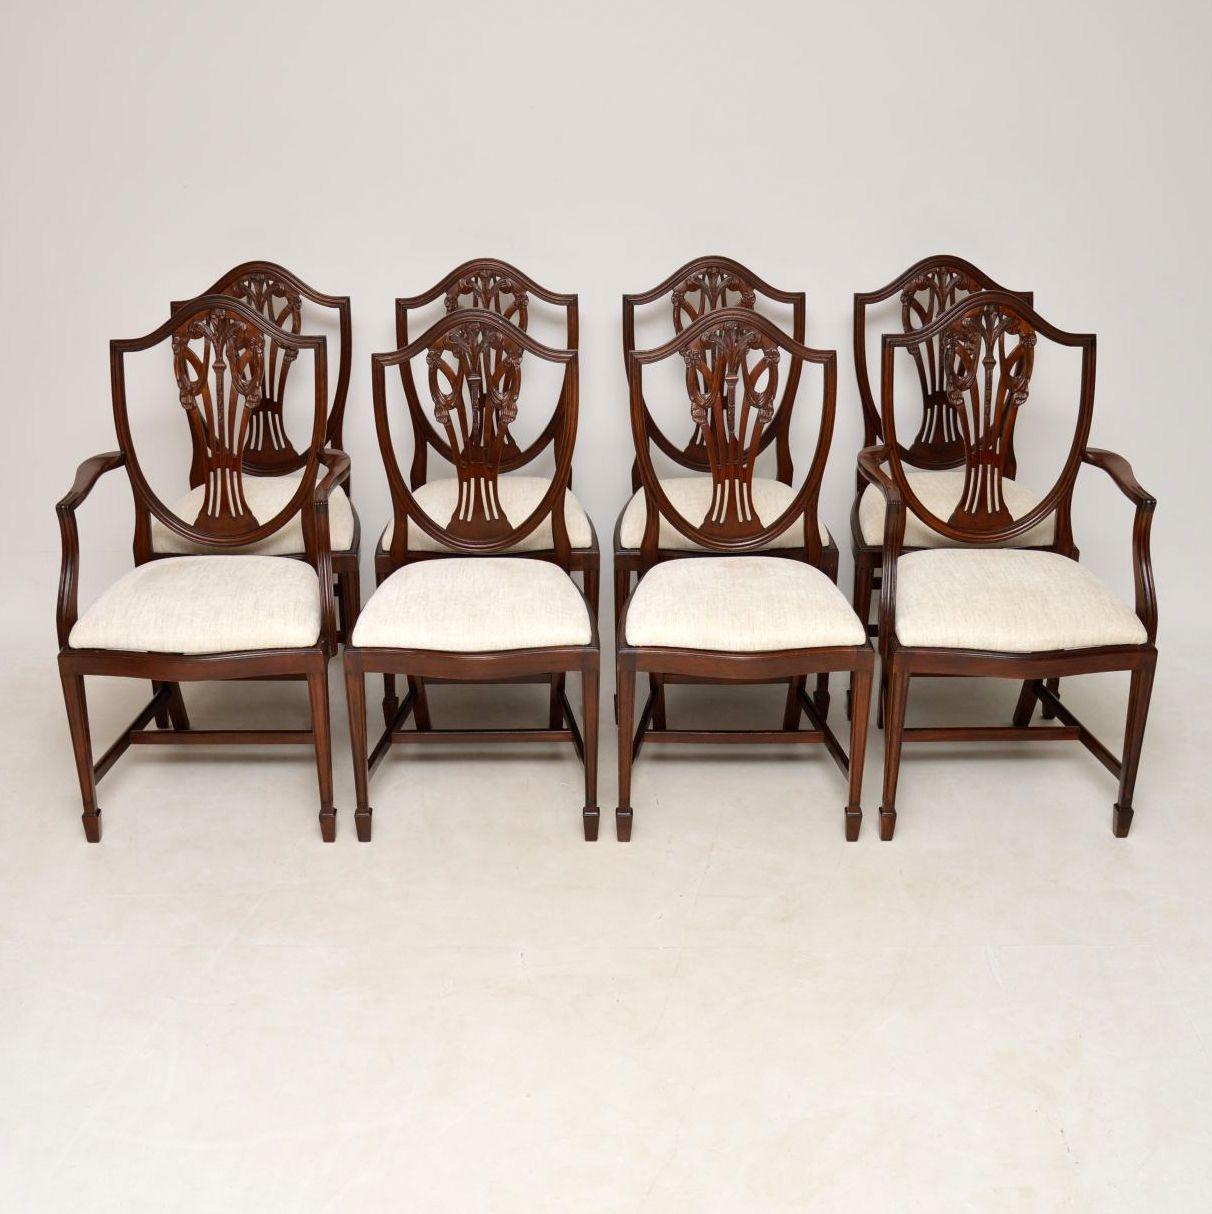 Set of eight Georgian style dining chairs including two carvers. They have just been re-polished and the seats re-upholstered in a lovely textured cream fabric, which sadly we can get anymore of. The seats aren’t sitting in right in the images,